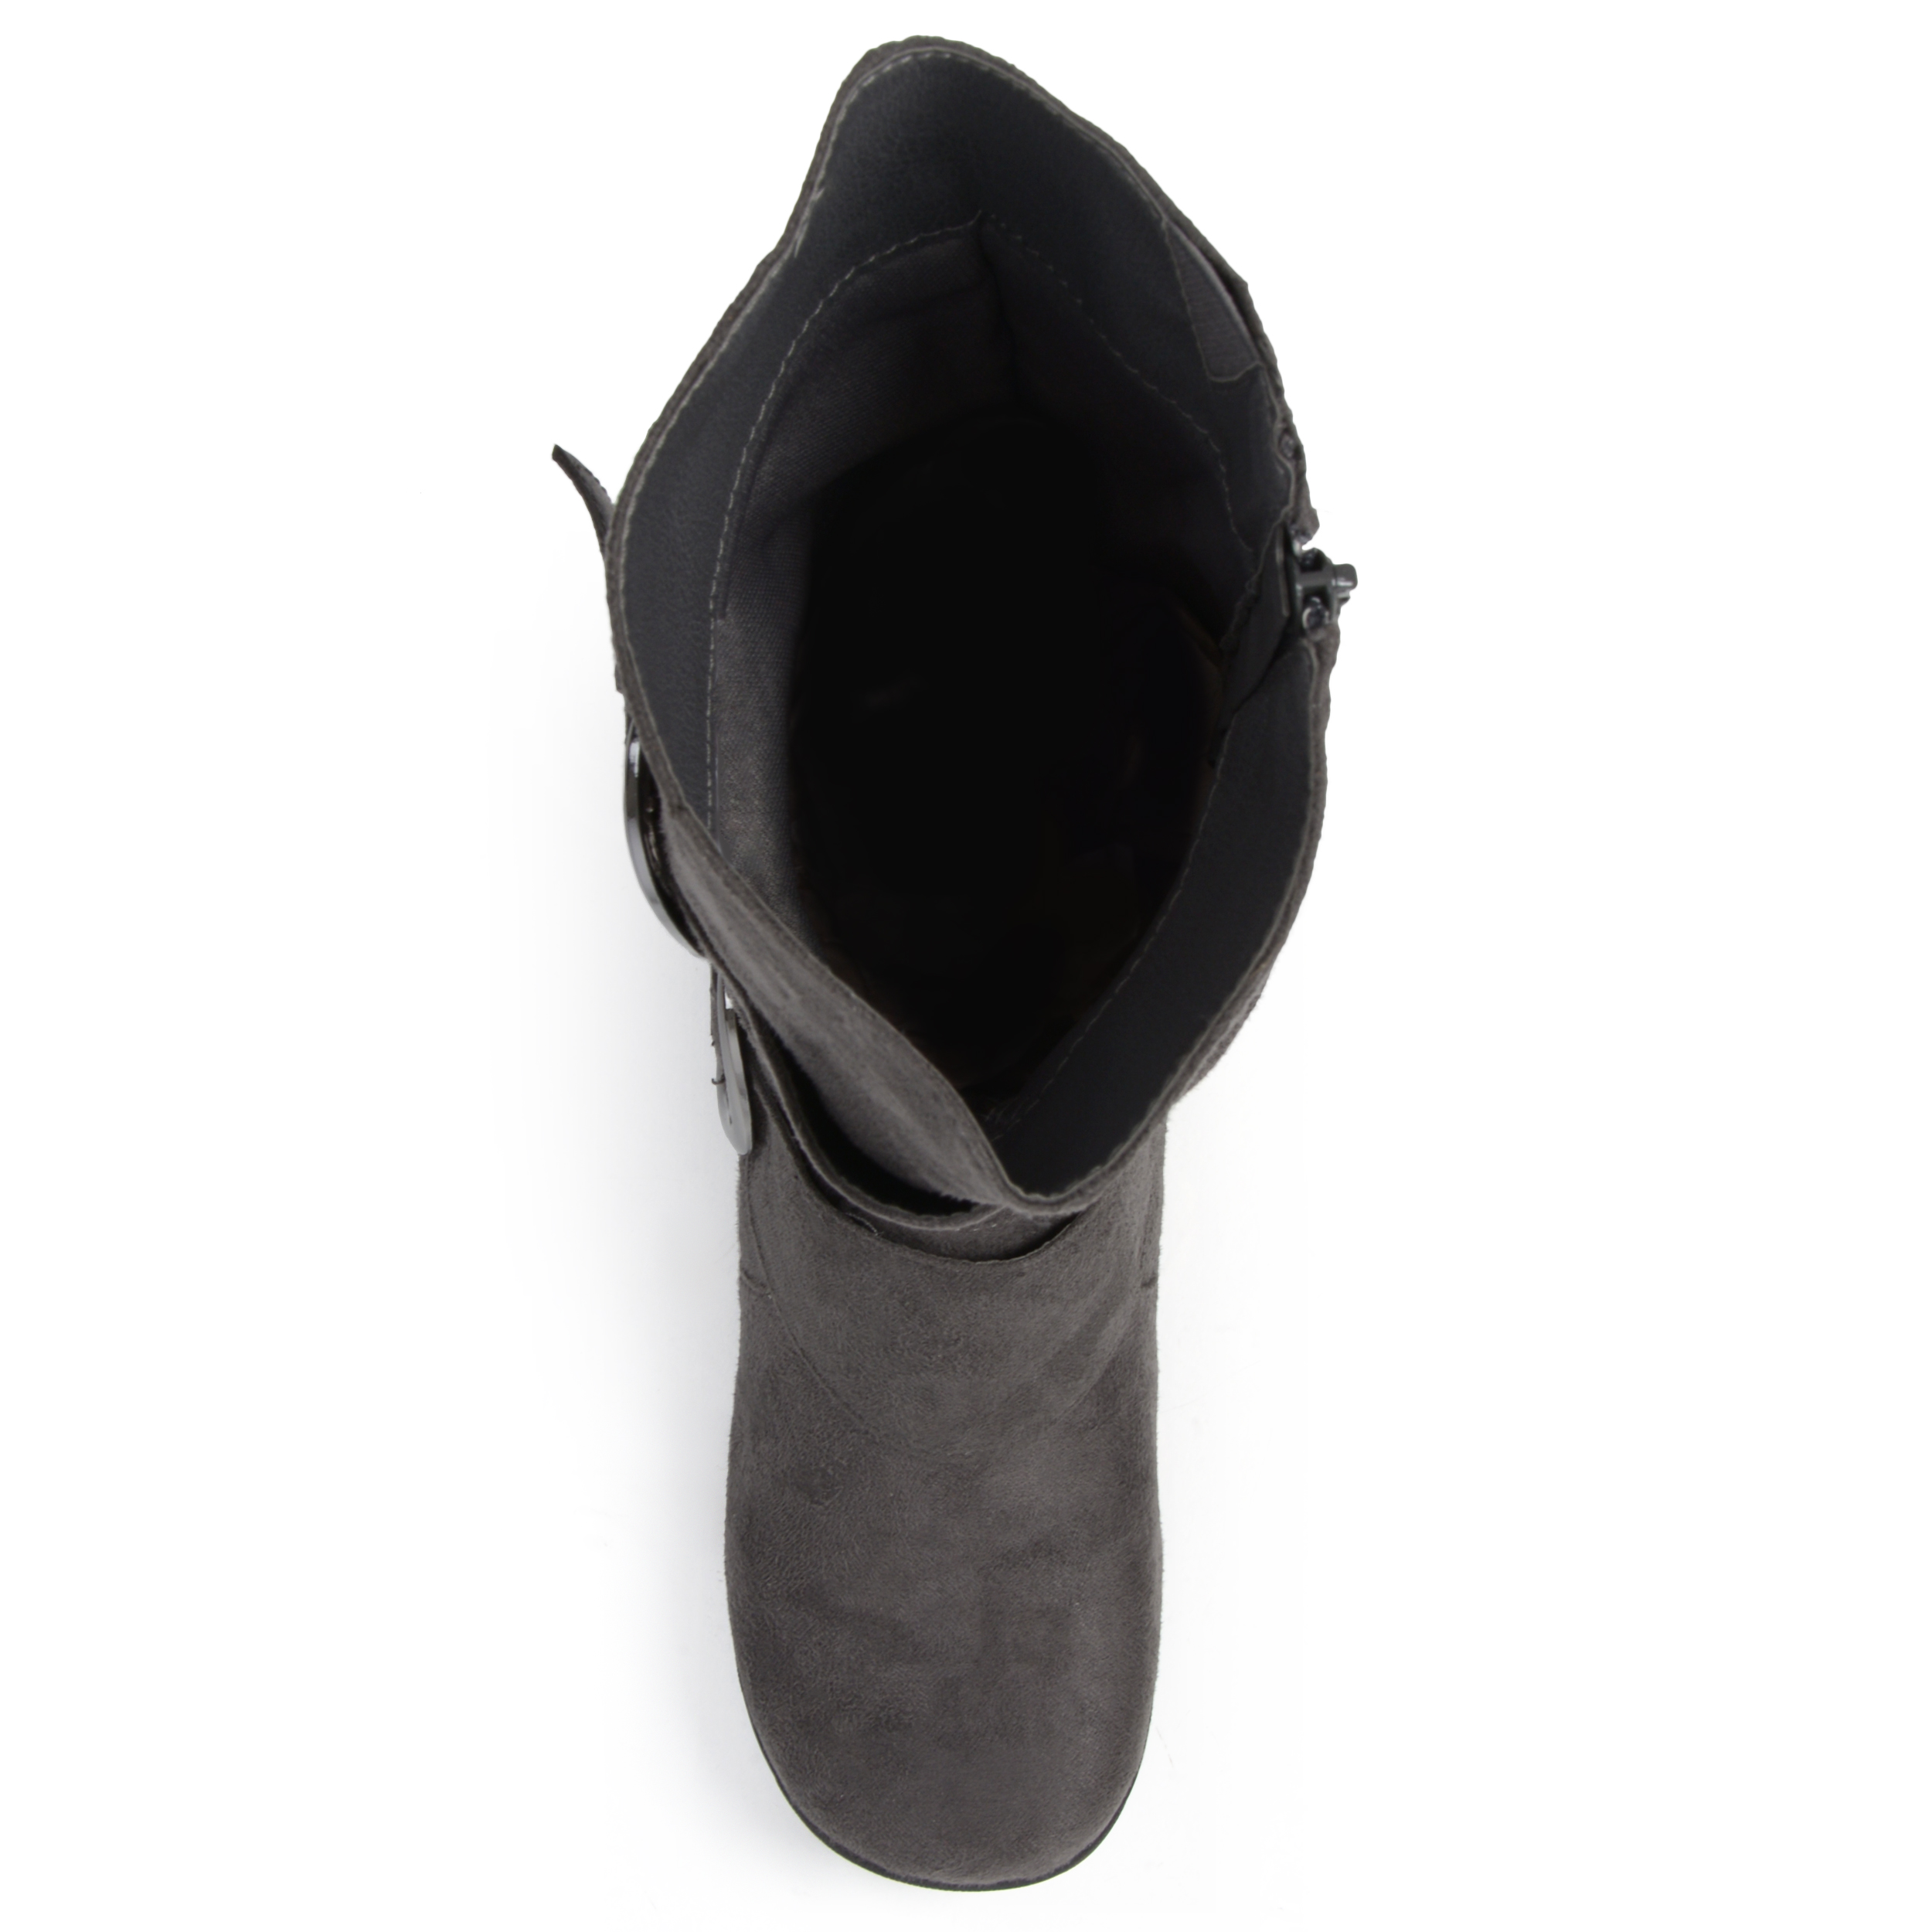 Women's Slouchy Wide Calf Boots - image 5 of 8